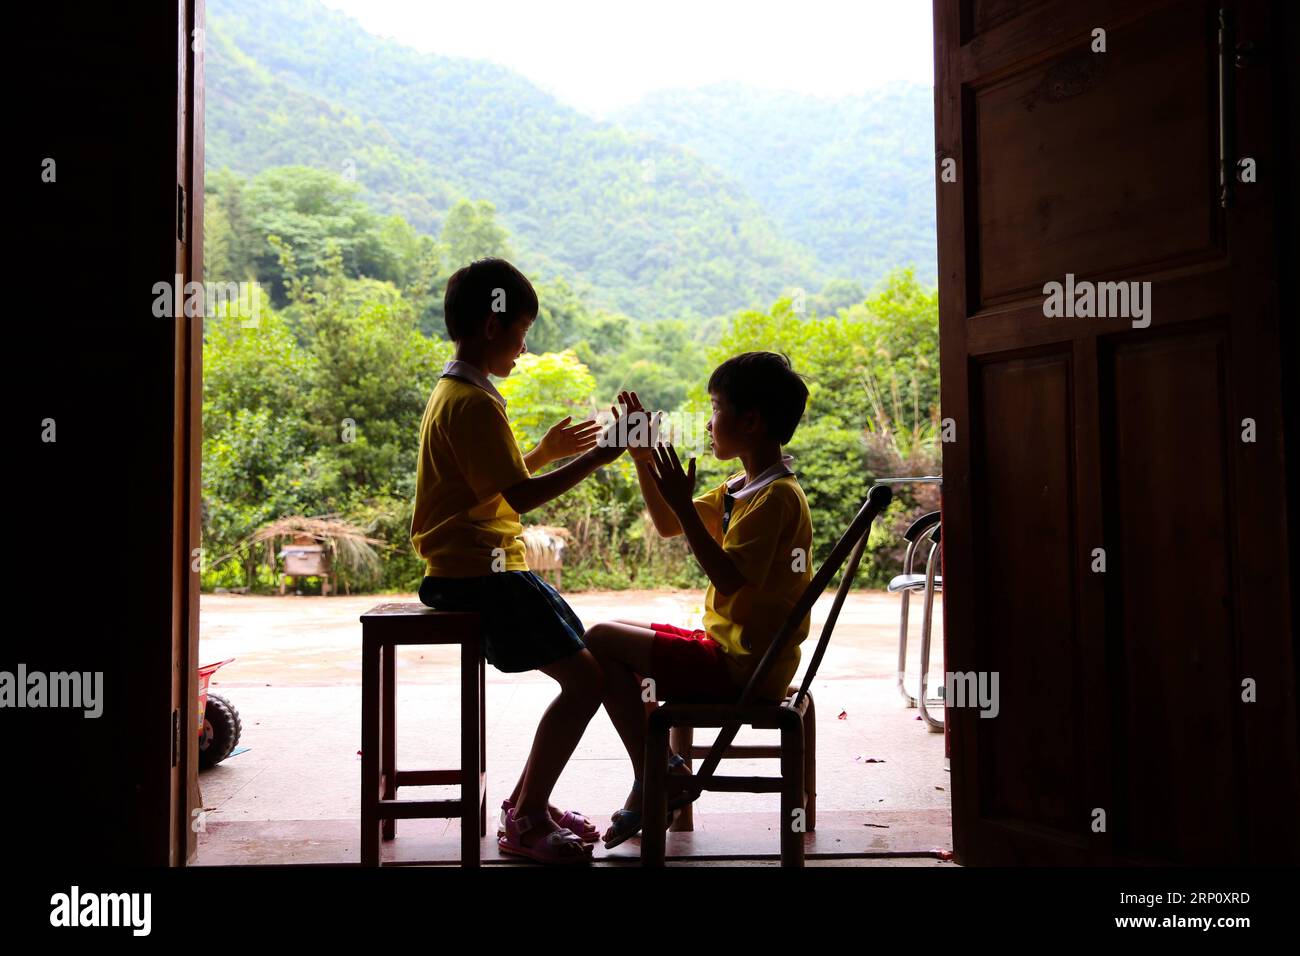 (180529) -- NANCHANG, May 29, 2018 -- Nine-year-old Zhang Xianghua (L) plays with her twin sister Zhang Xianglan in Suolong Village of Yudu County, east China s Jiangxi Province, May 23, 2018. With about 1,000 residents, Suolong Village has 29 cases of multiple births, a high rate considering the modest population size. ) (lmm) CHINA-JIANGXI-VILLAGE-MULTIPLE BIRTHS-TWINS-LIFE (CN) PanxSiwei PUBLICATIONxNOTxINxCHN Stock Photo